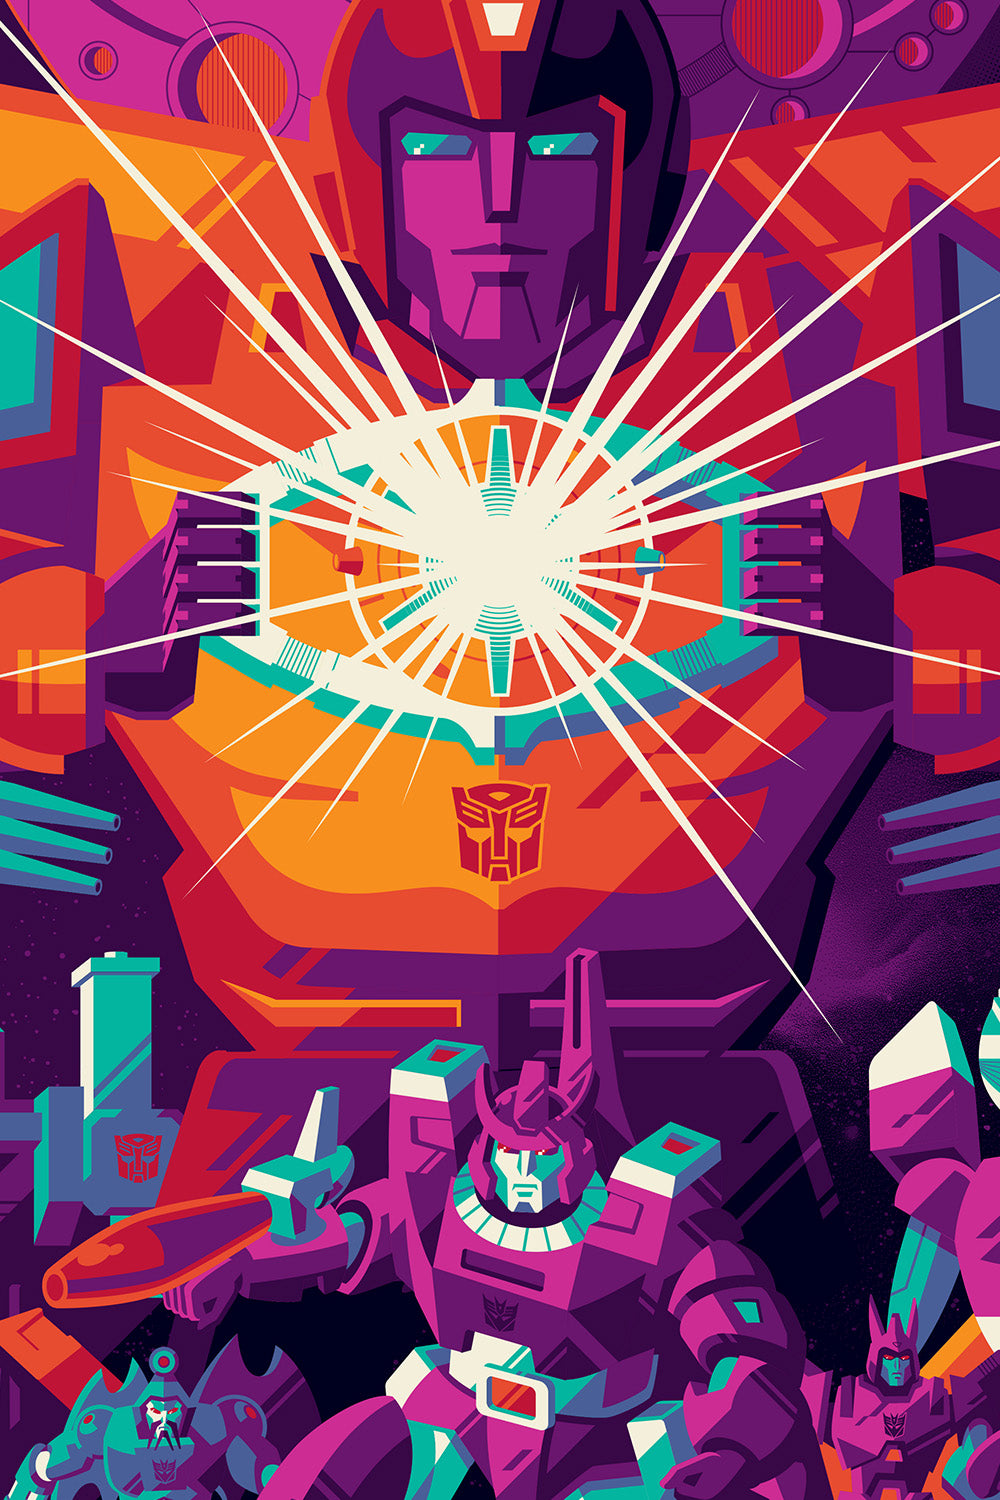 TRANSFORMERS: THE MOVIE Poster Art from Tom Whalen — GeekTyrant